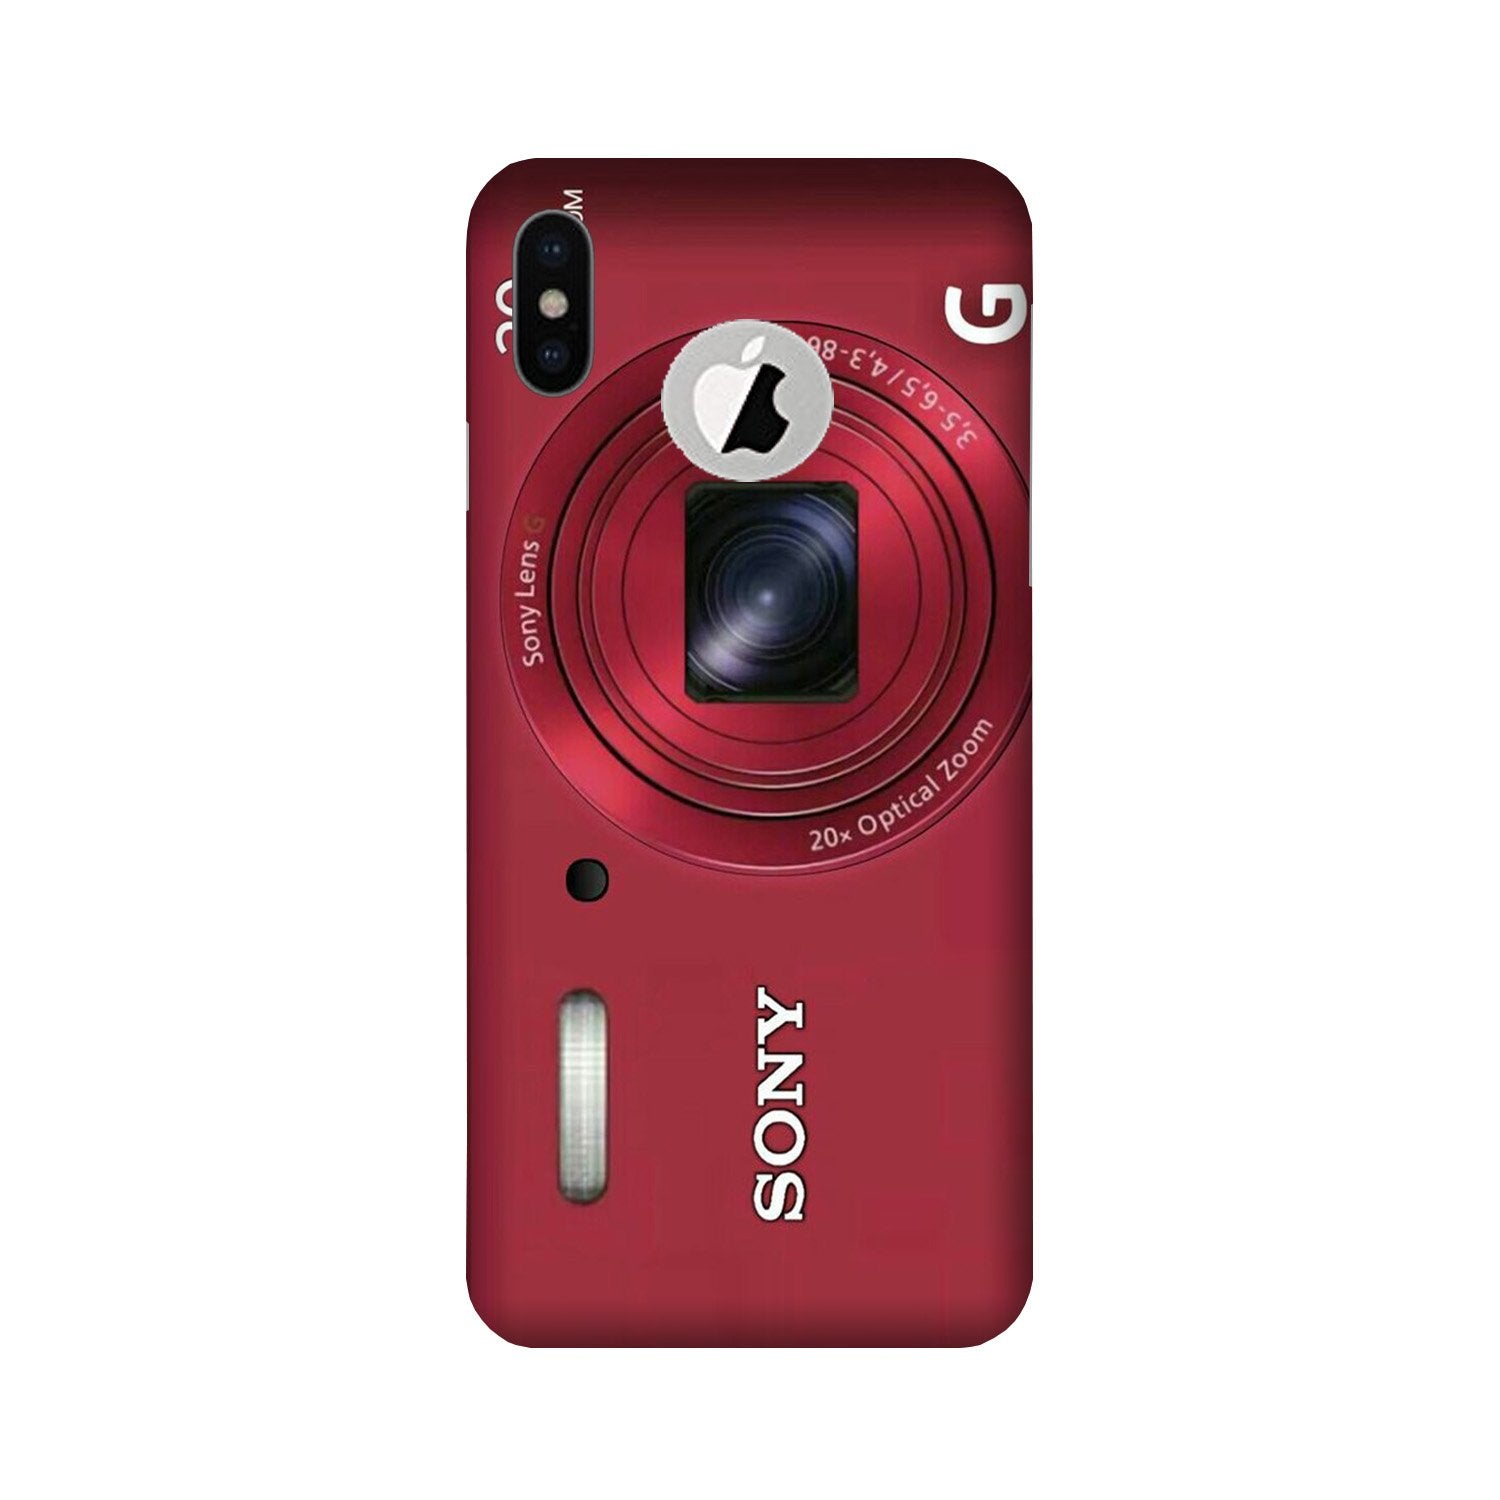 Sony Case for iPhone Xs logo cut(Design No. 274)